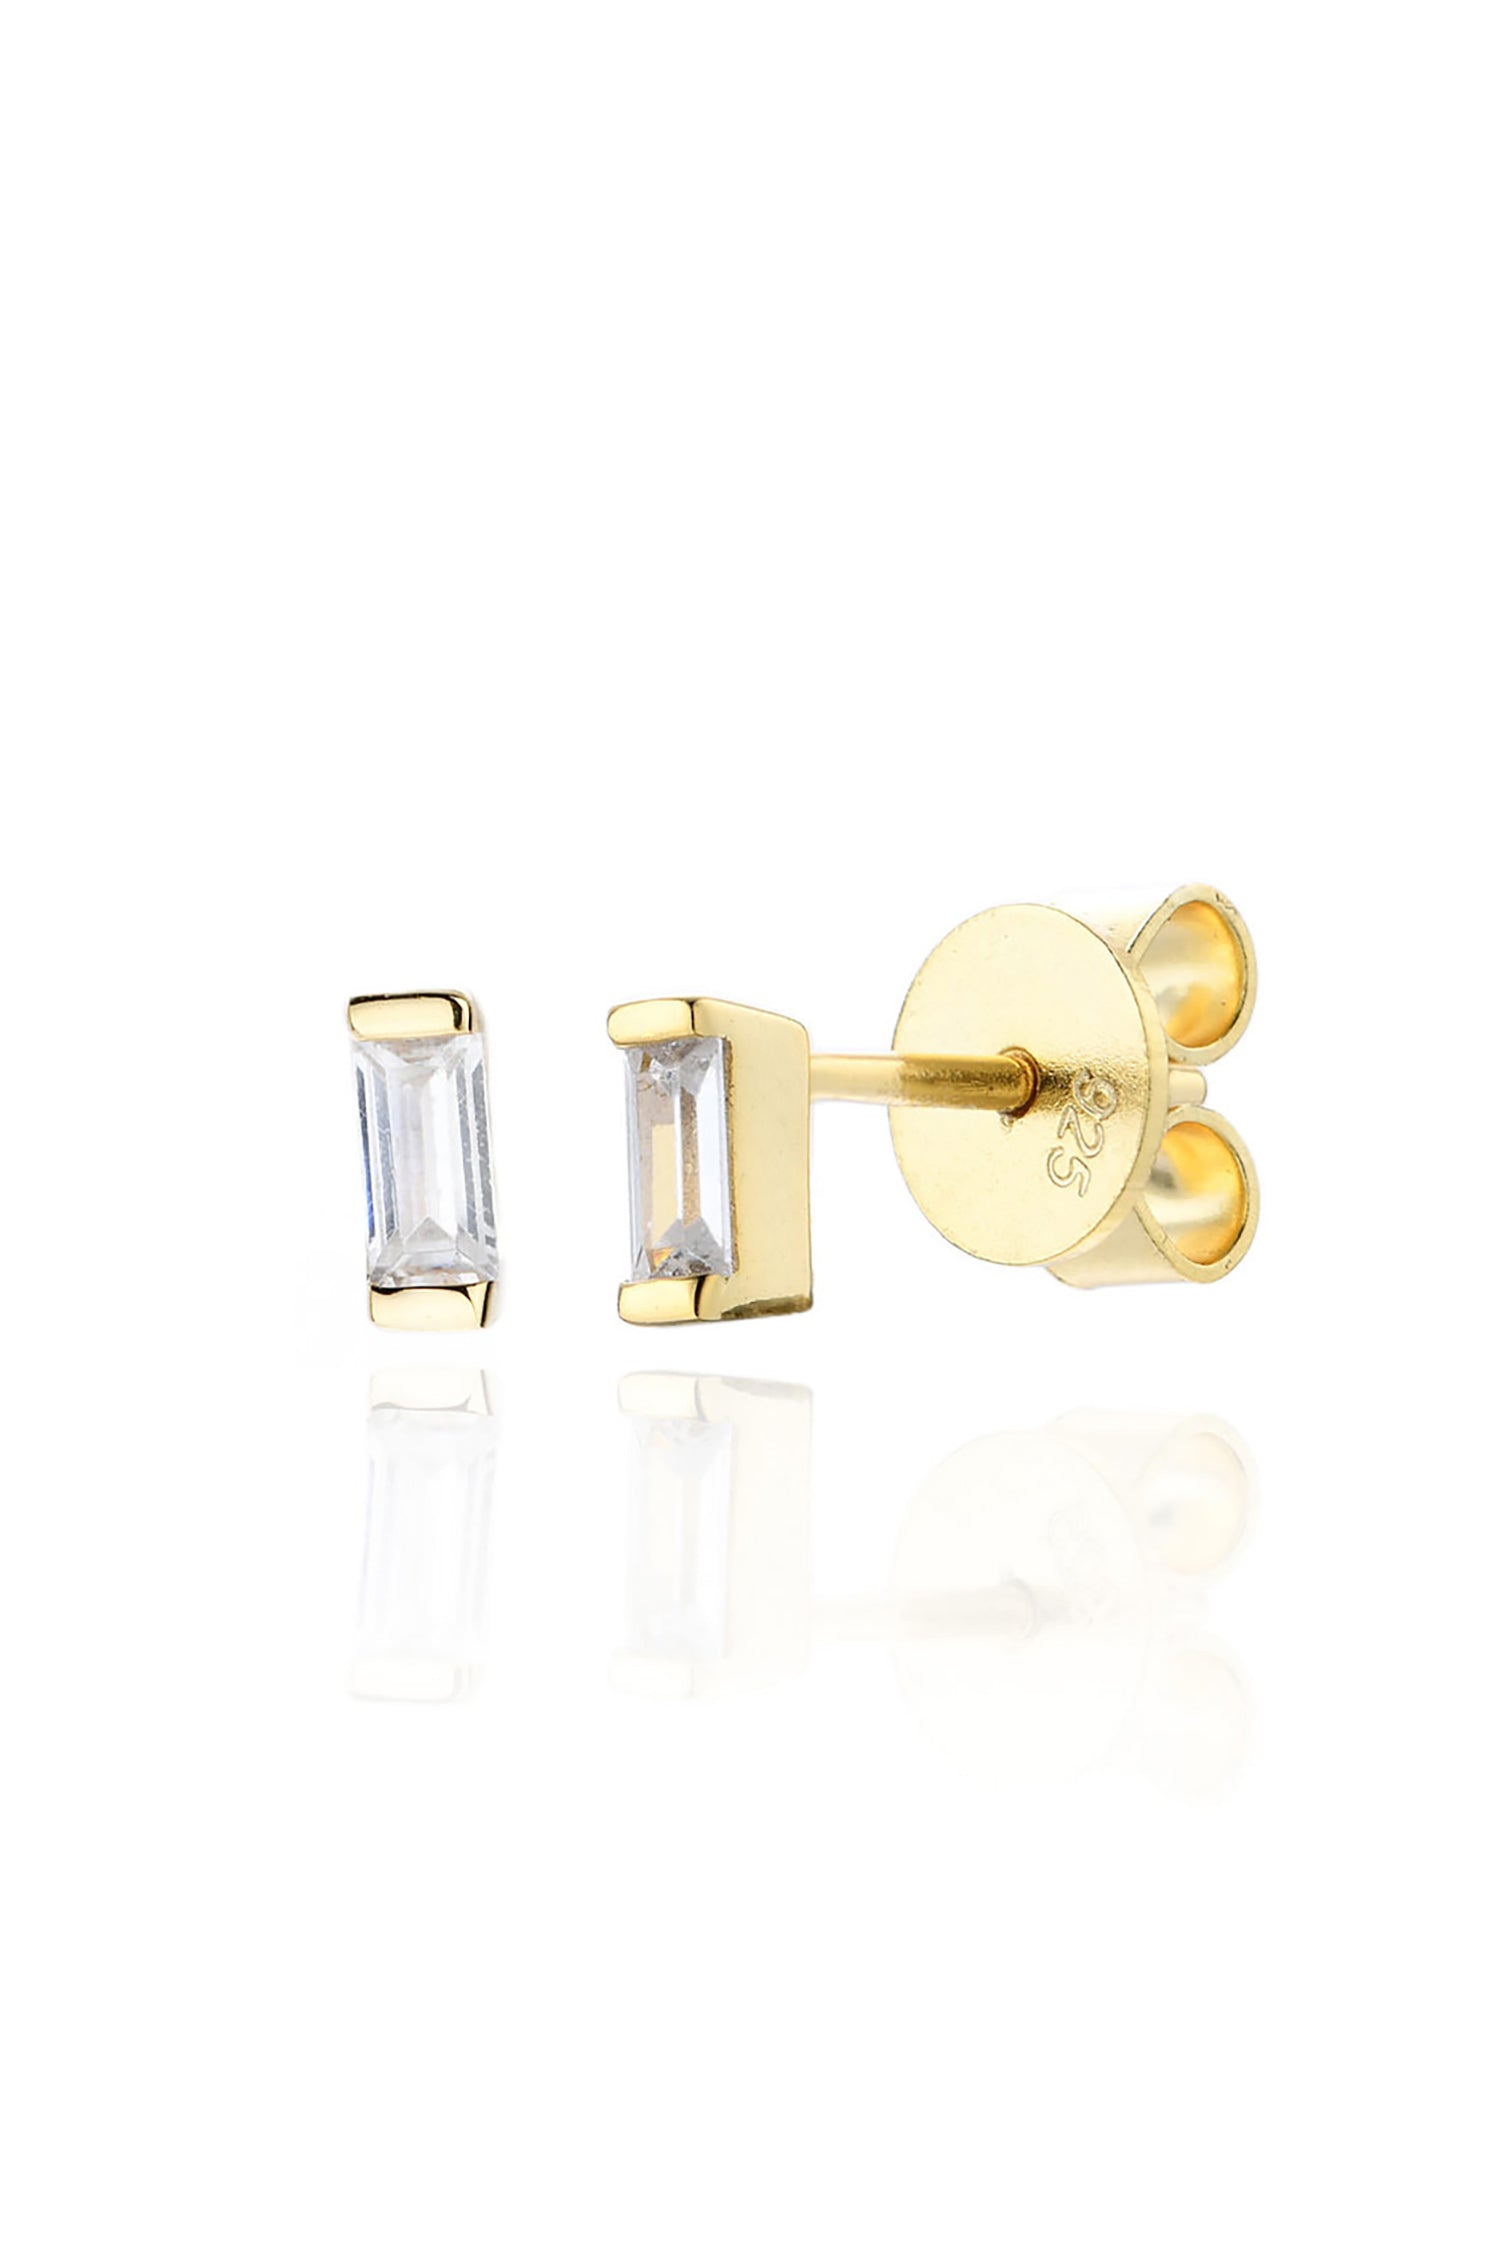  Baguette White Crystal Stud Earrings 14k Gold Plated Sterling Silver White Background